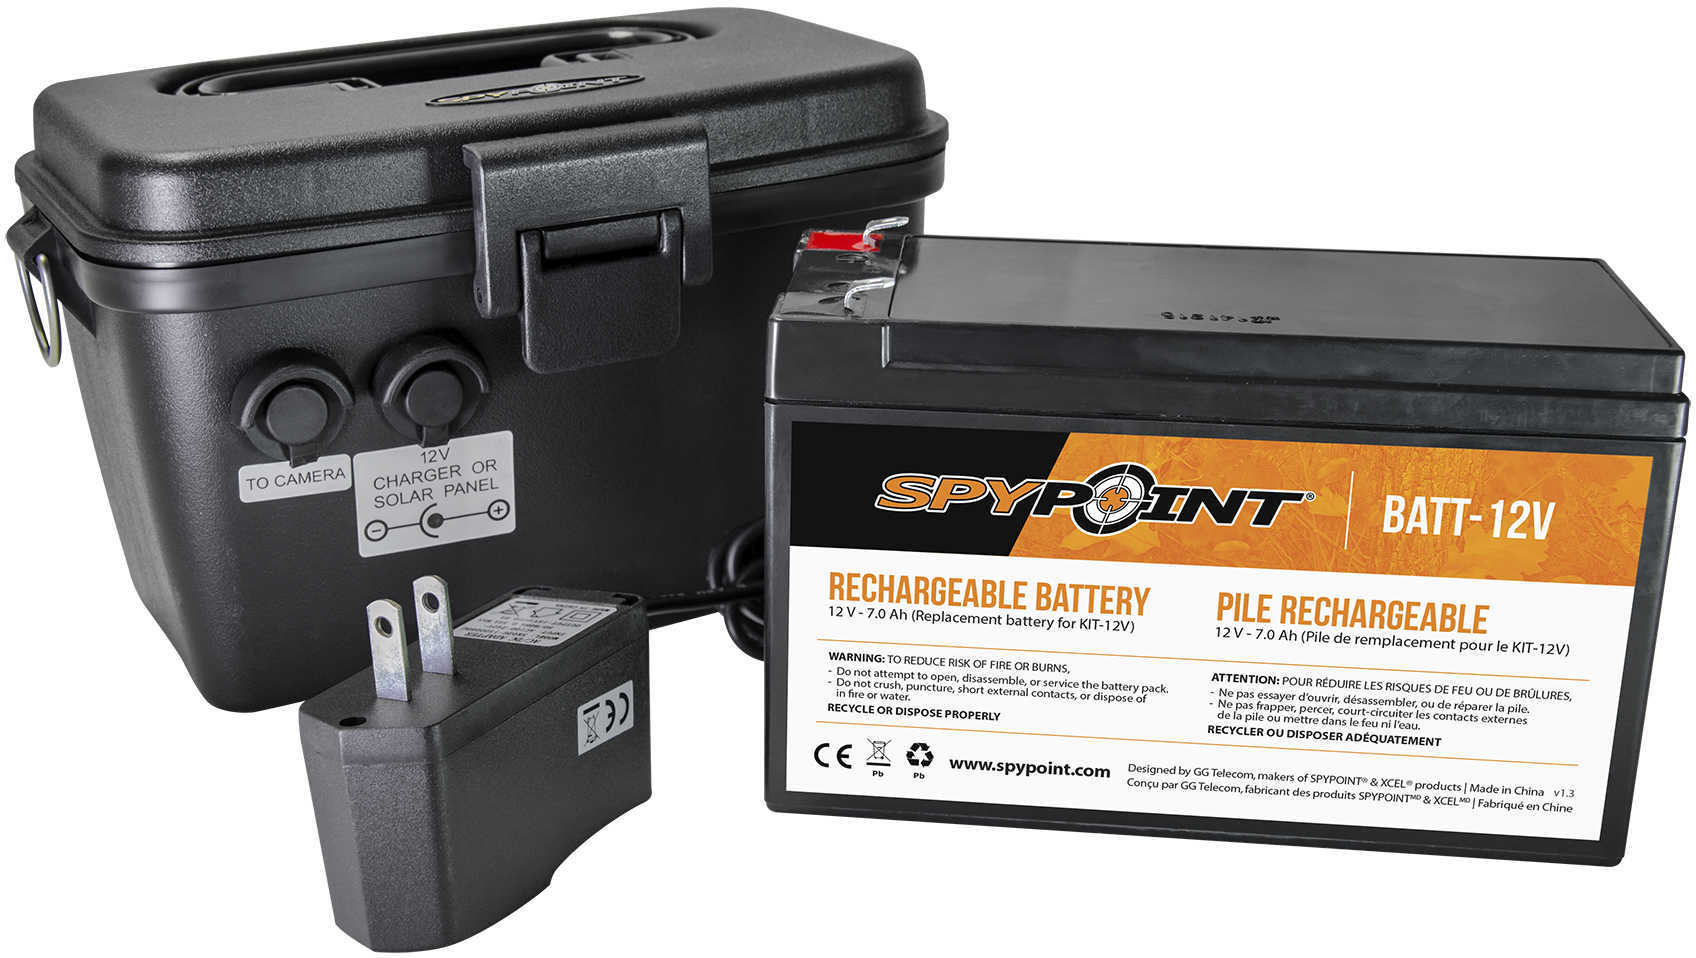 SpyPoint Rechargeable Battery 12V w/Charger Model: KIT-12V